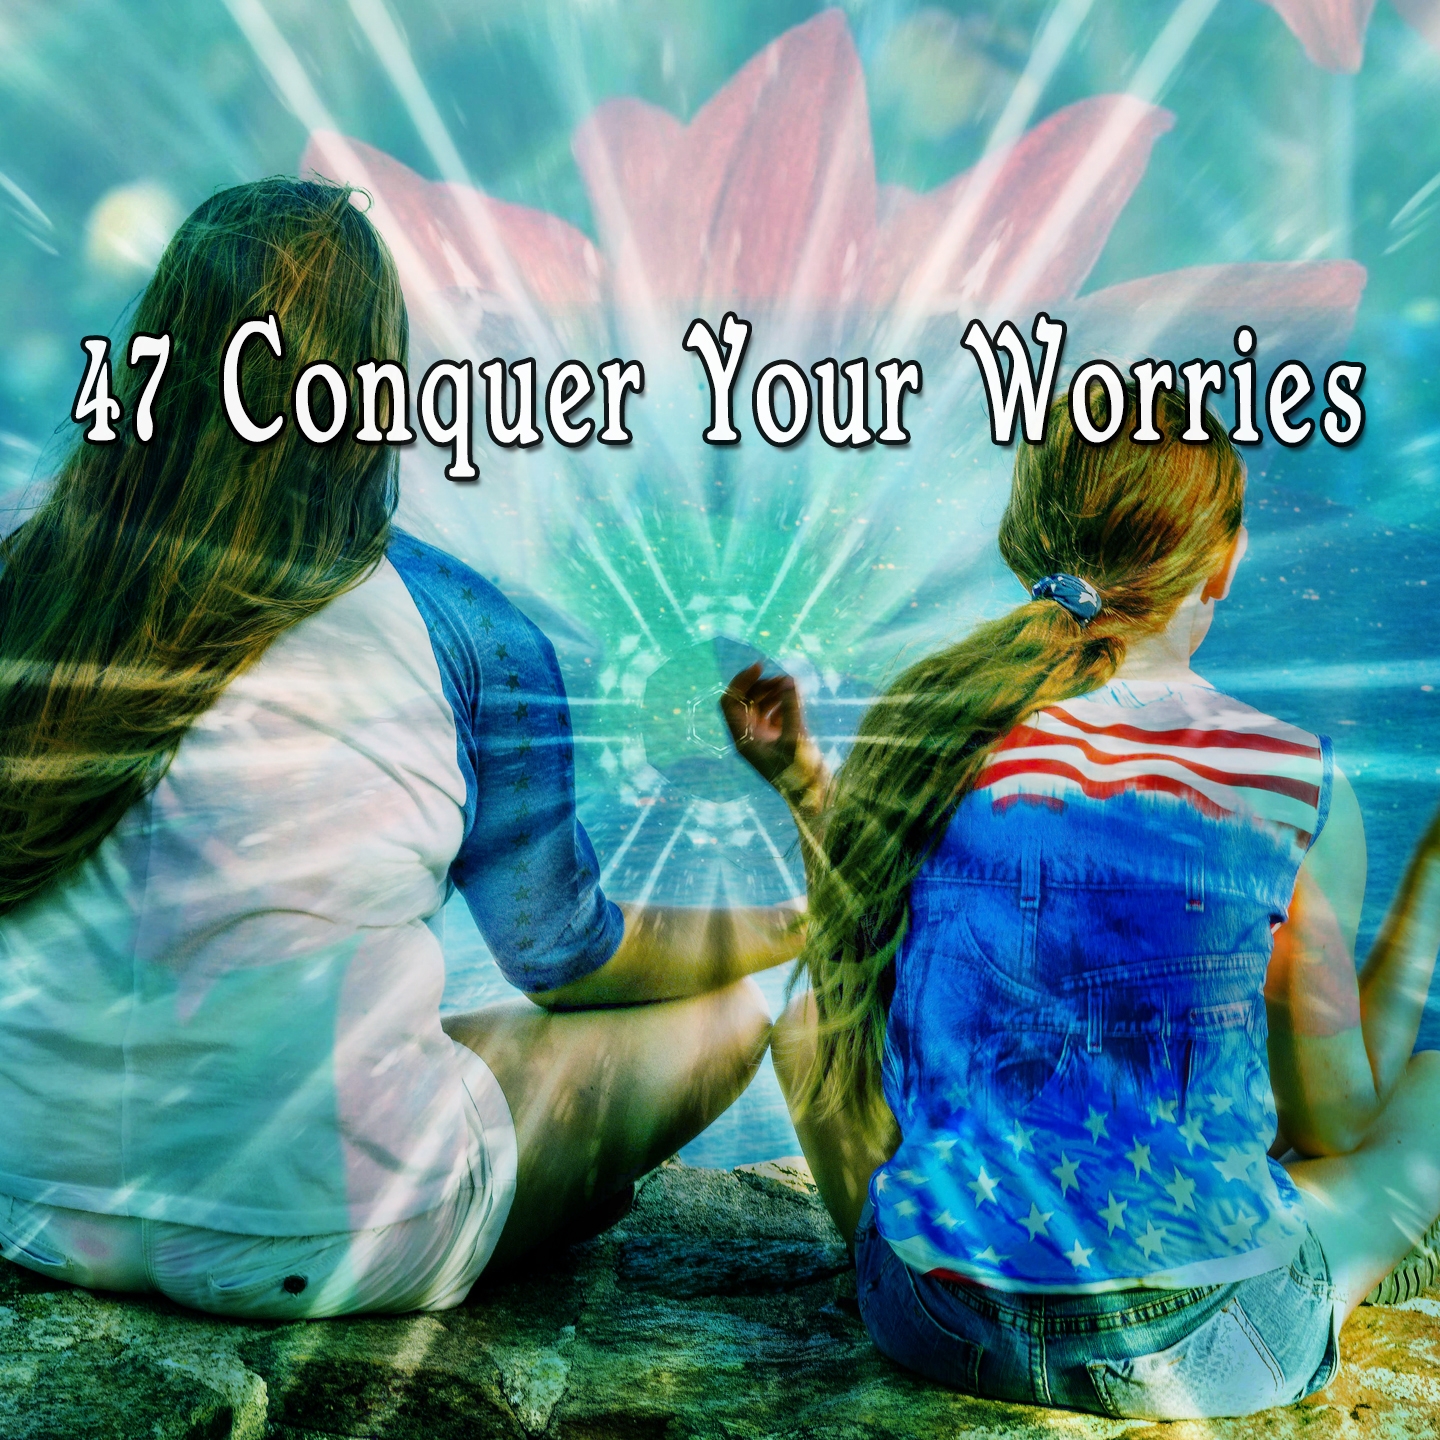 47 Conquer Your Worries